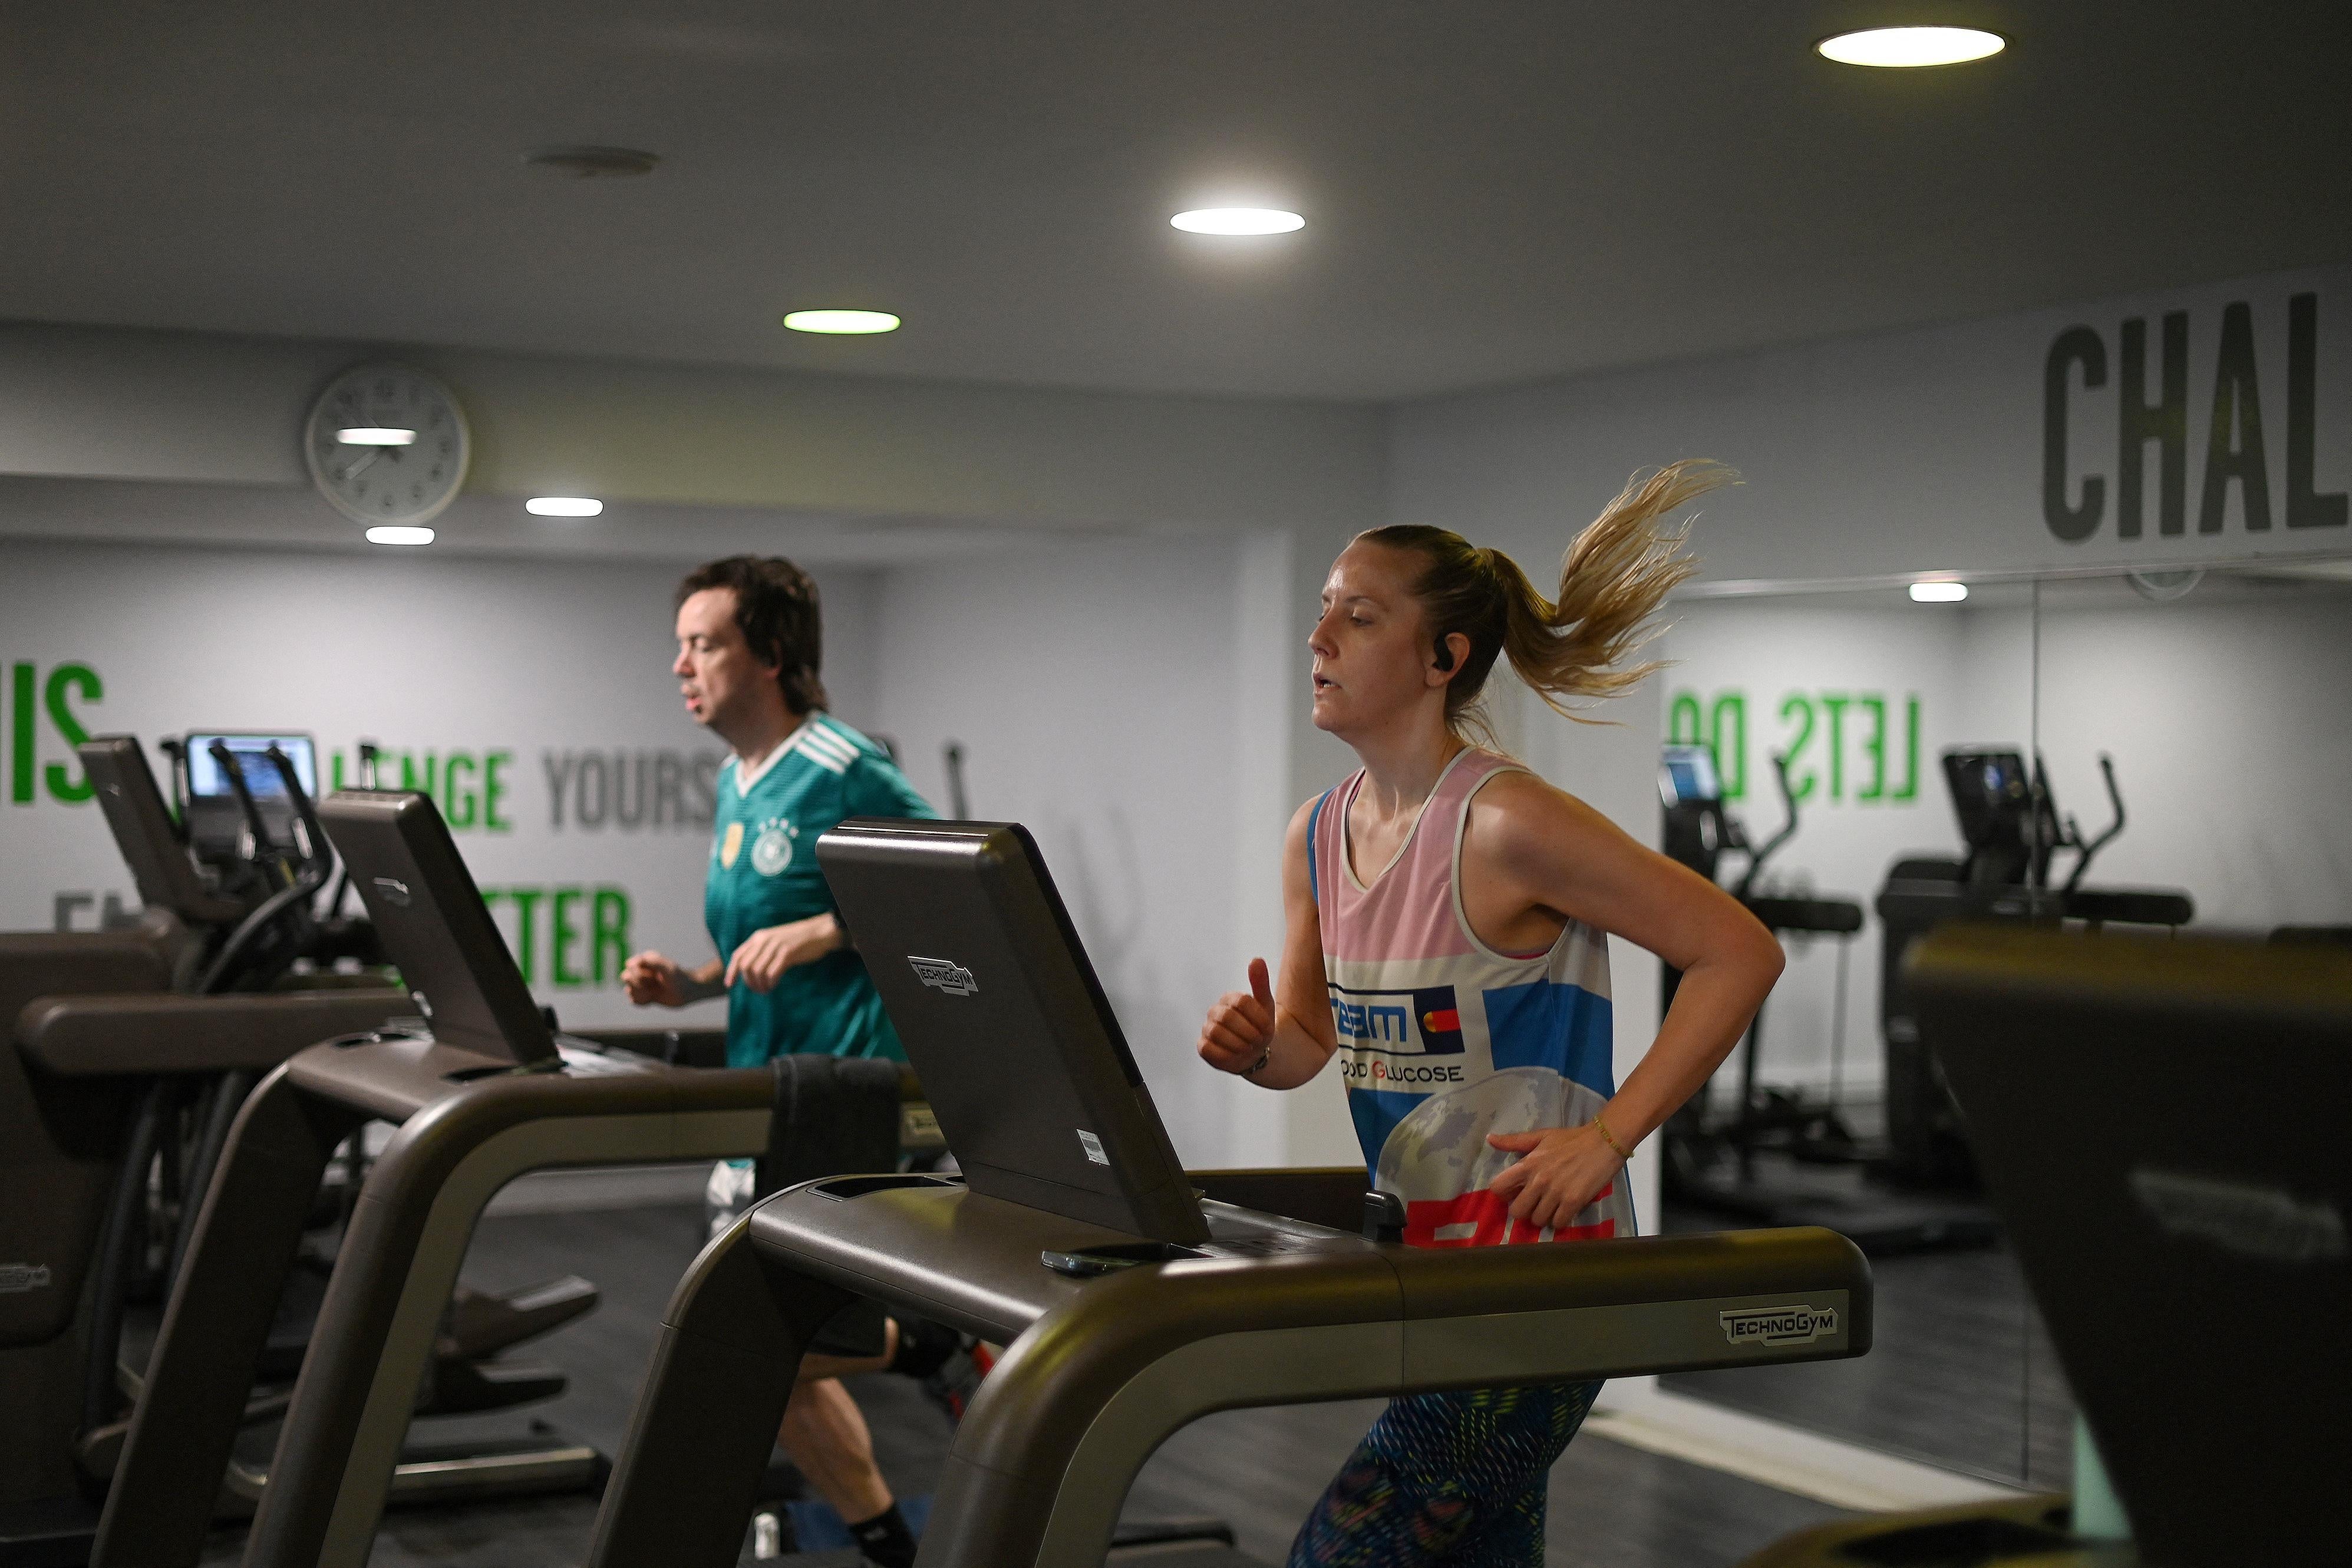 People use the running machines as the indoor gym reopens at Clissold Leisure Centre in north London as coronavirus restrictions are eased across the country following England's third national lockdown, on April 12, 2021.